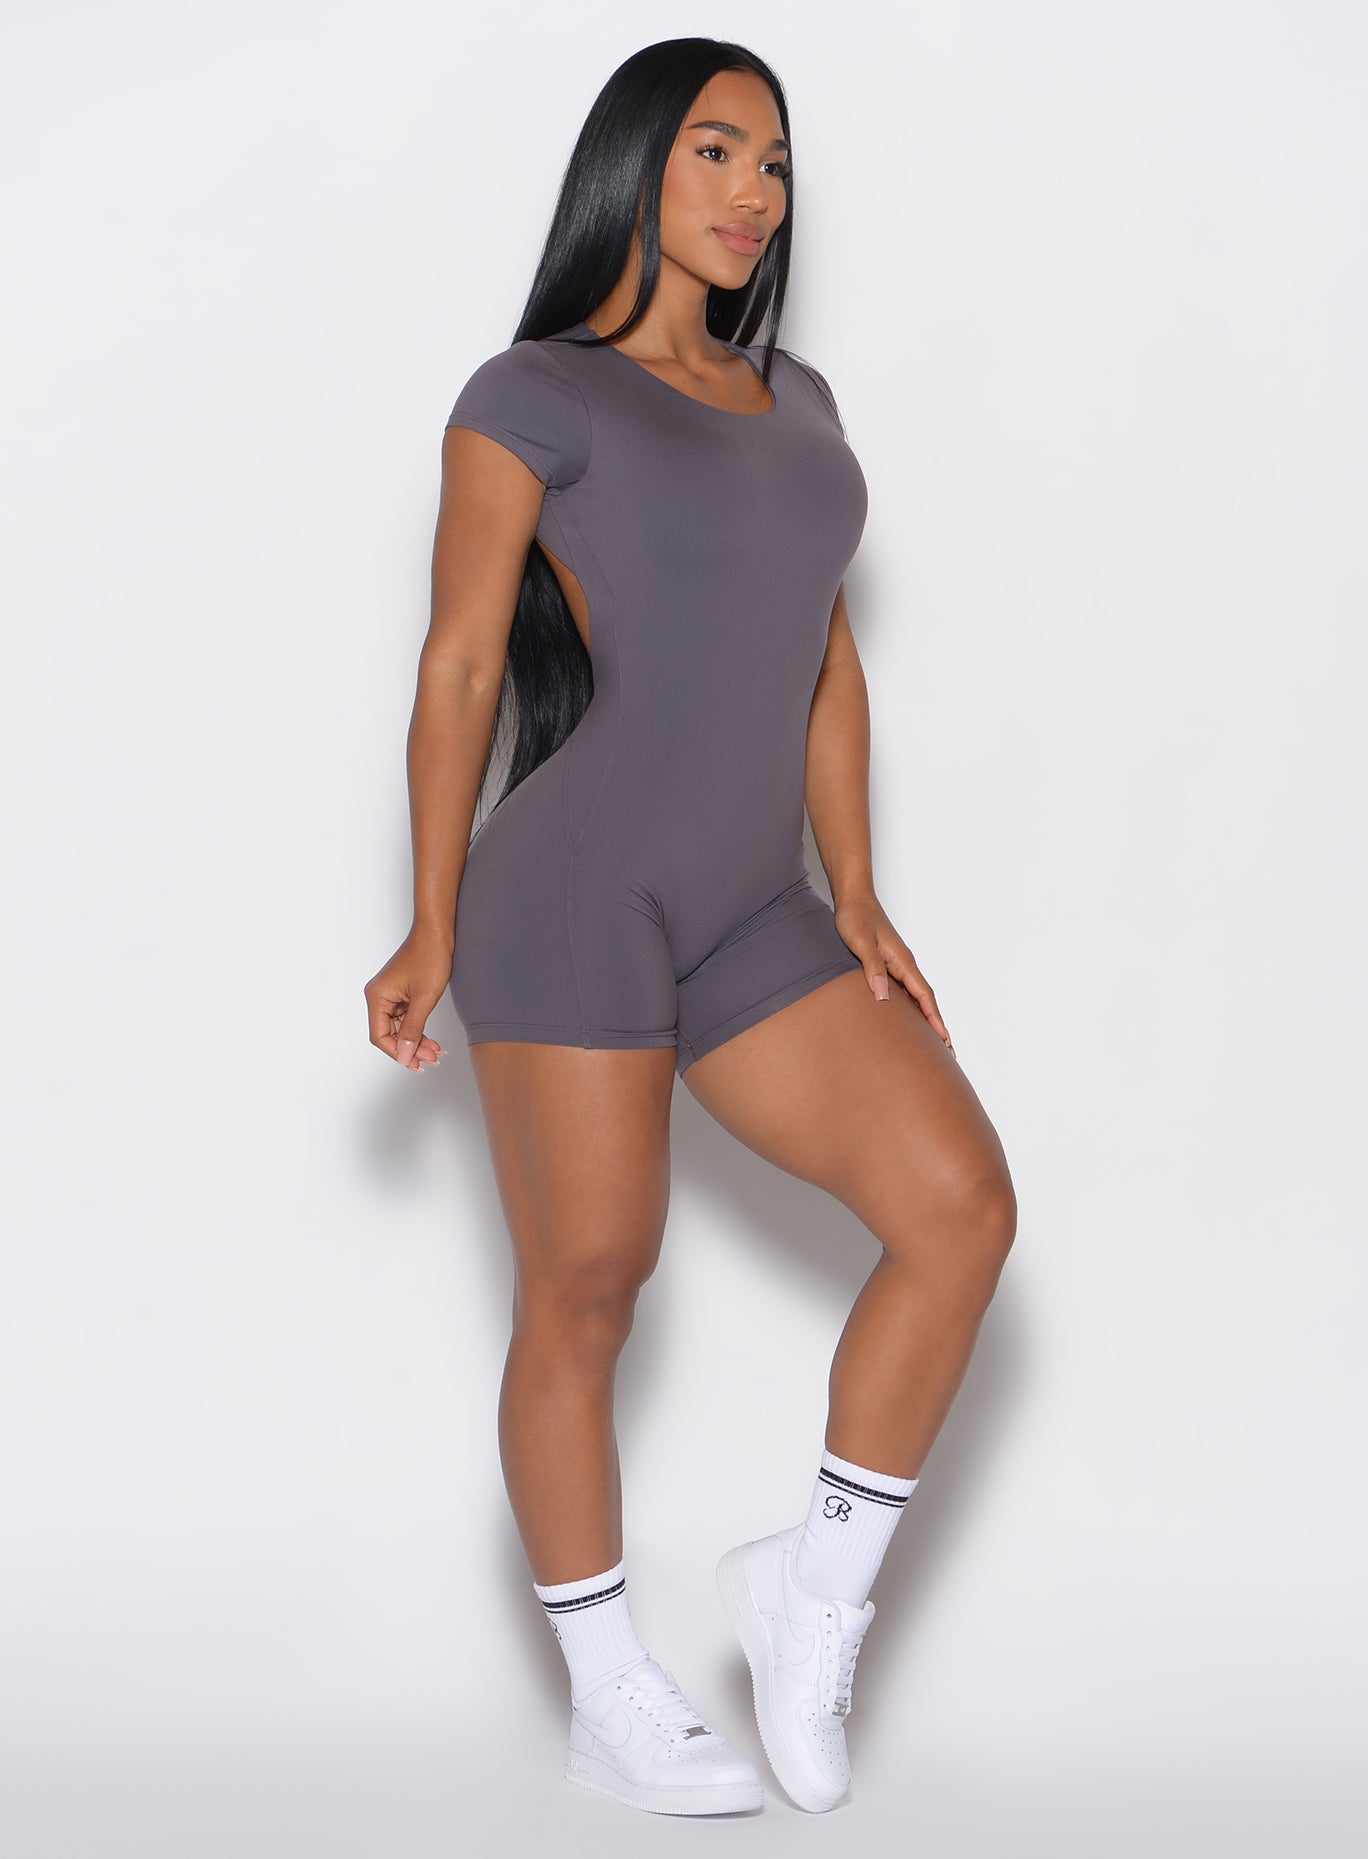 Right side profile view of a model wearing our Open Back Tee Bodysuit Short in gray smoke color